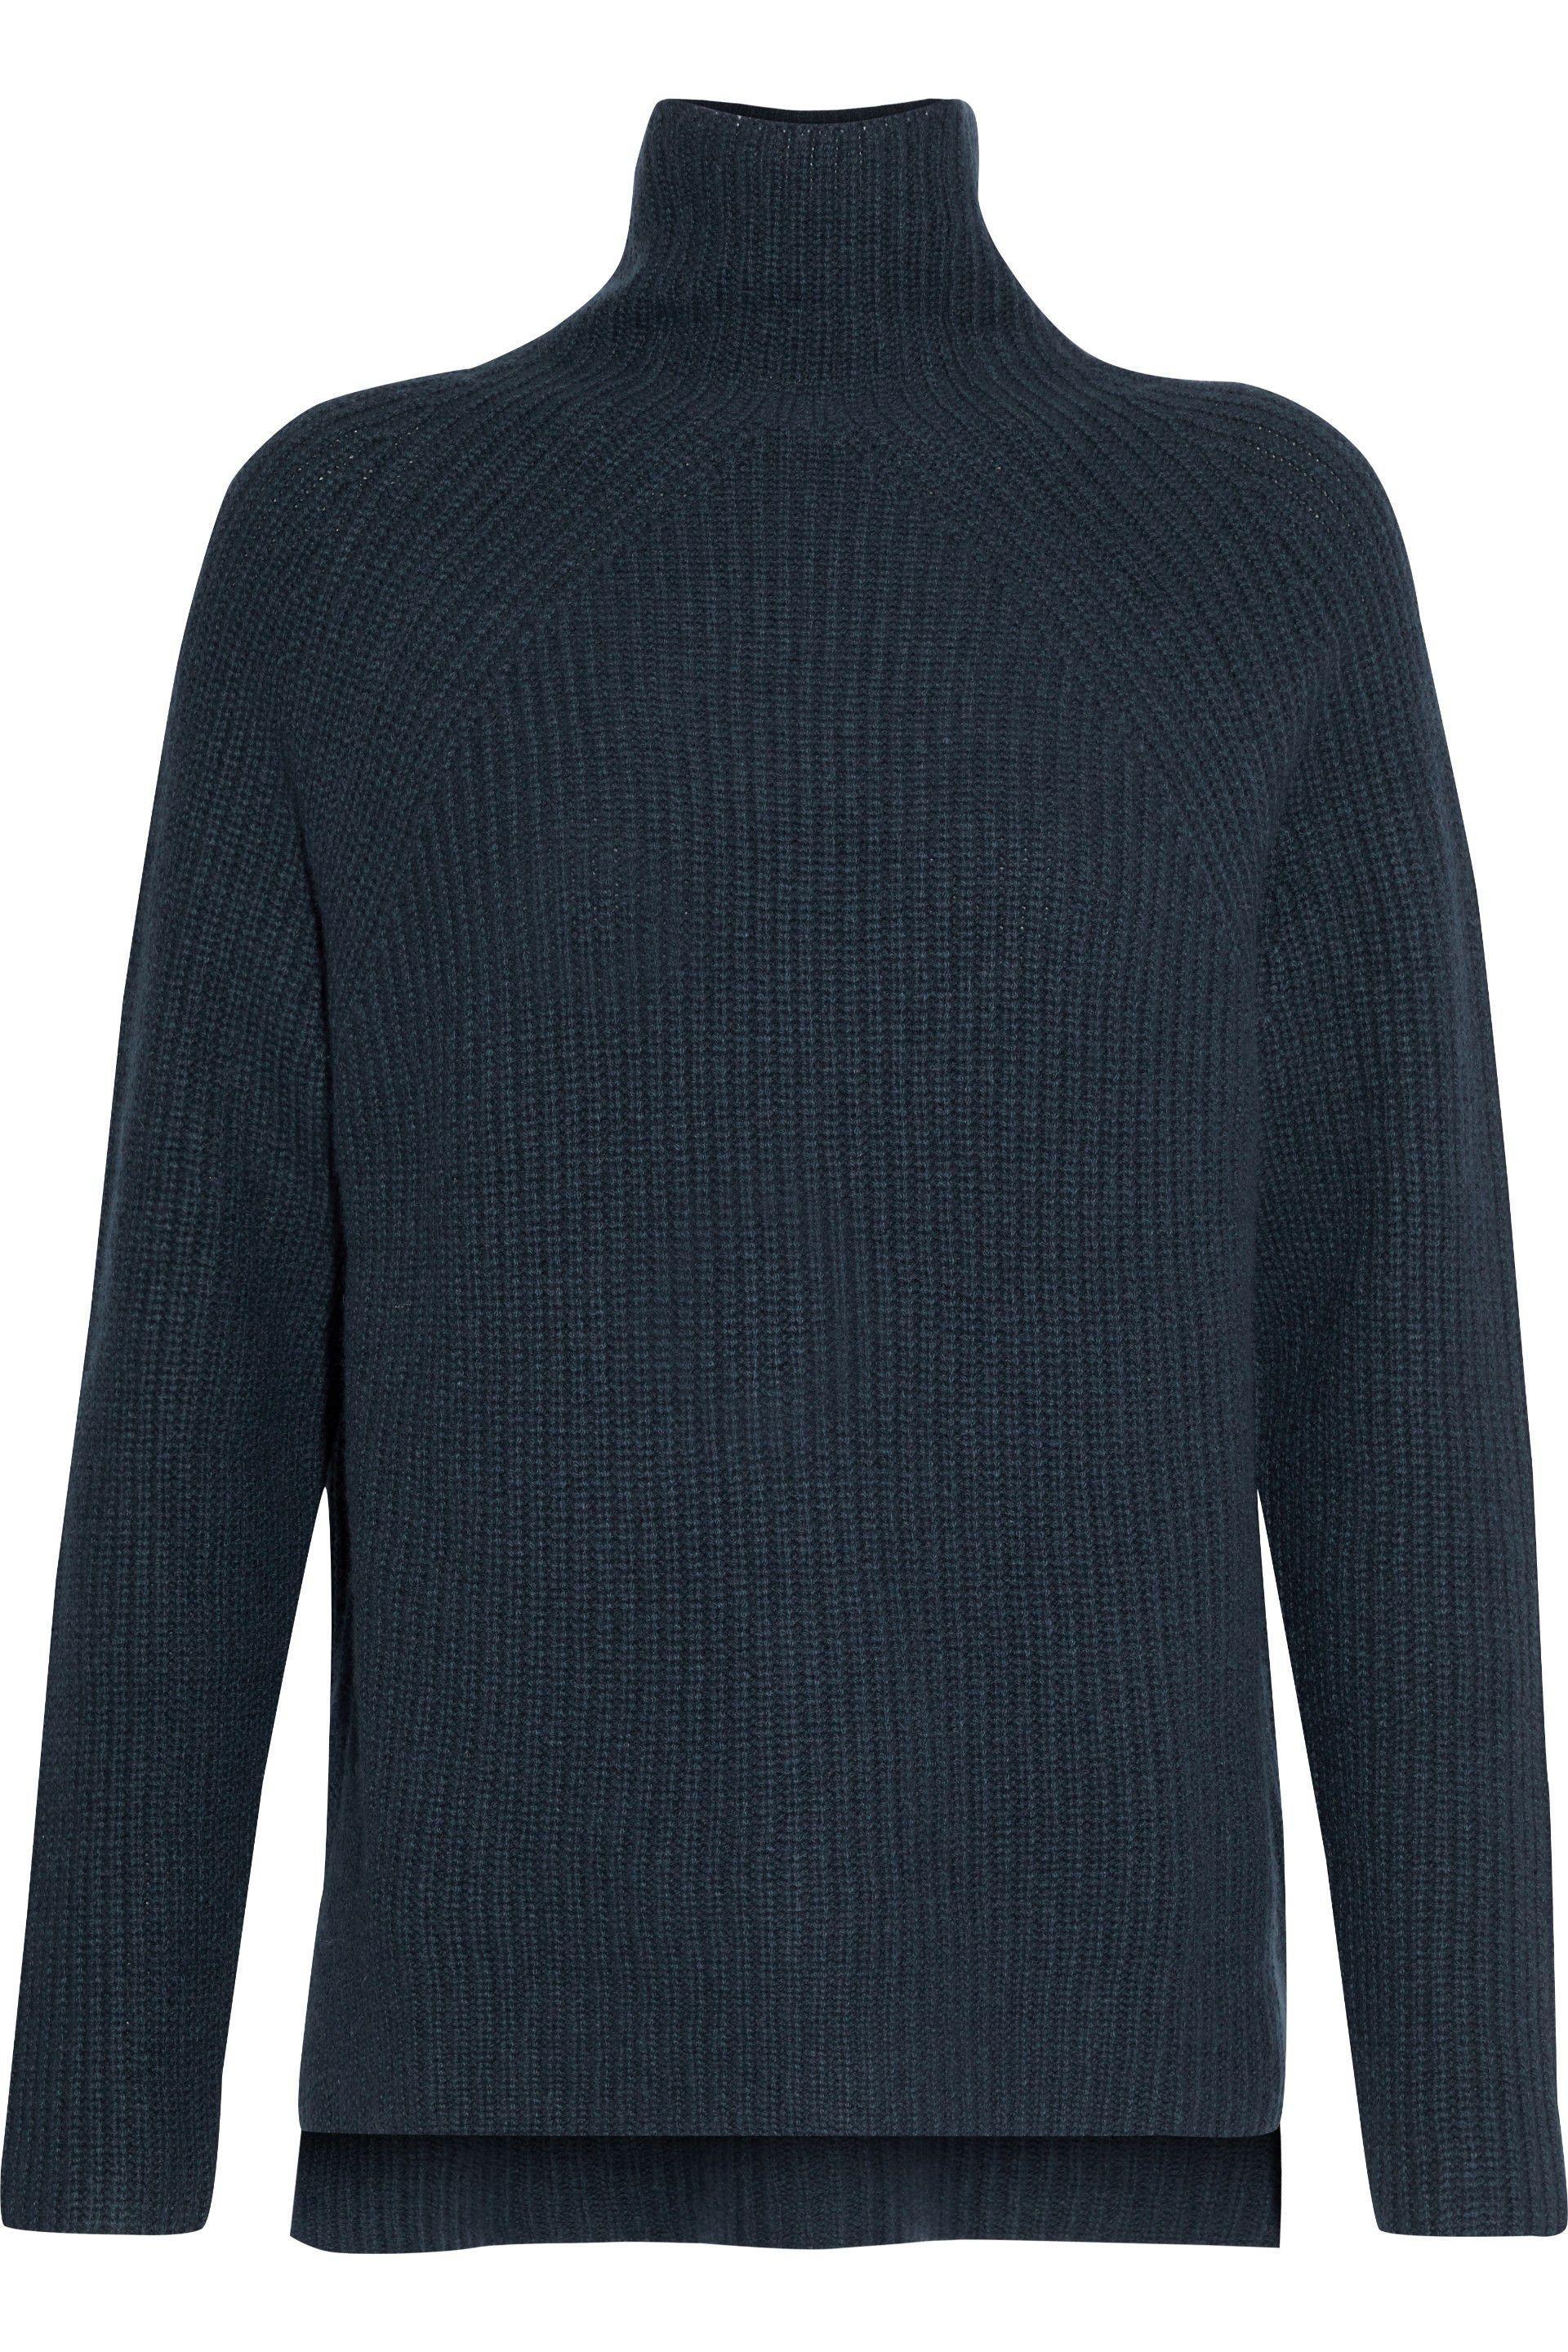 N.Peal Cashmere Ribbed Cashmere Turtleneck Sweater Navy in Blue - Lyst